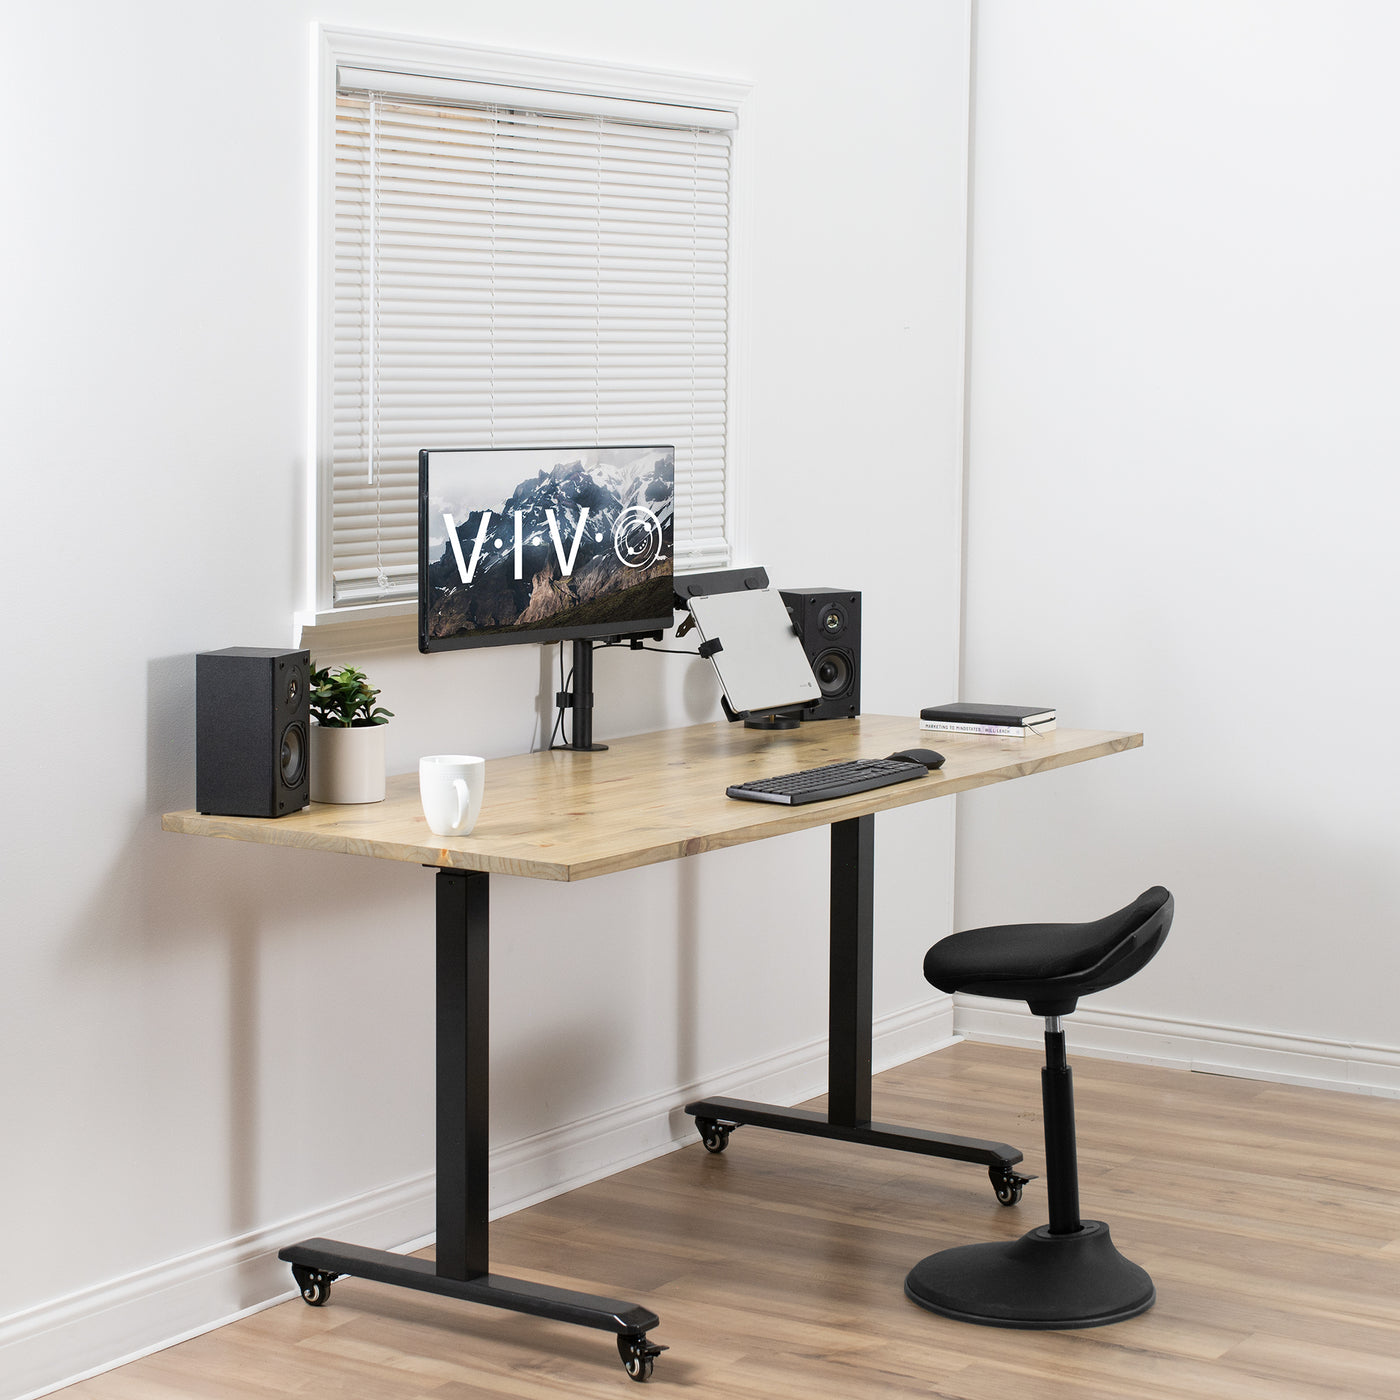 Live office space with an adjustable laptop stand arm.